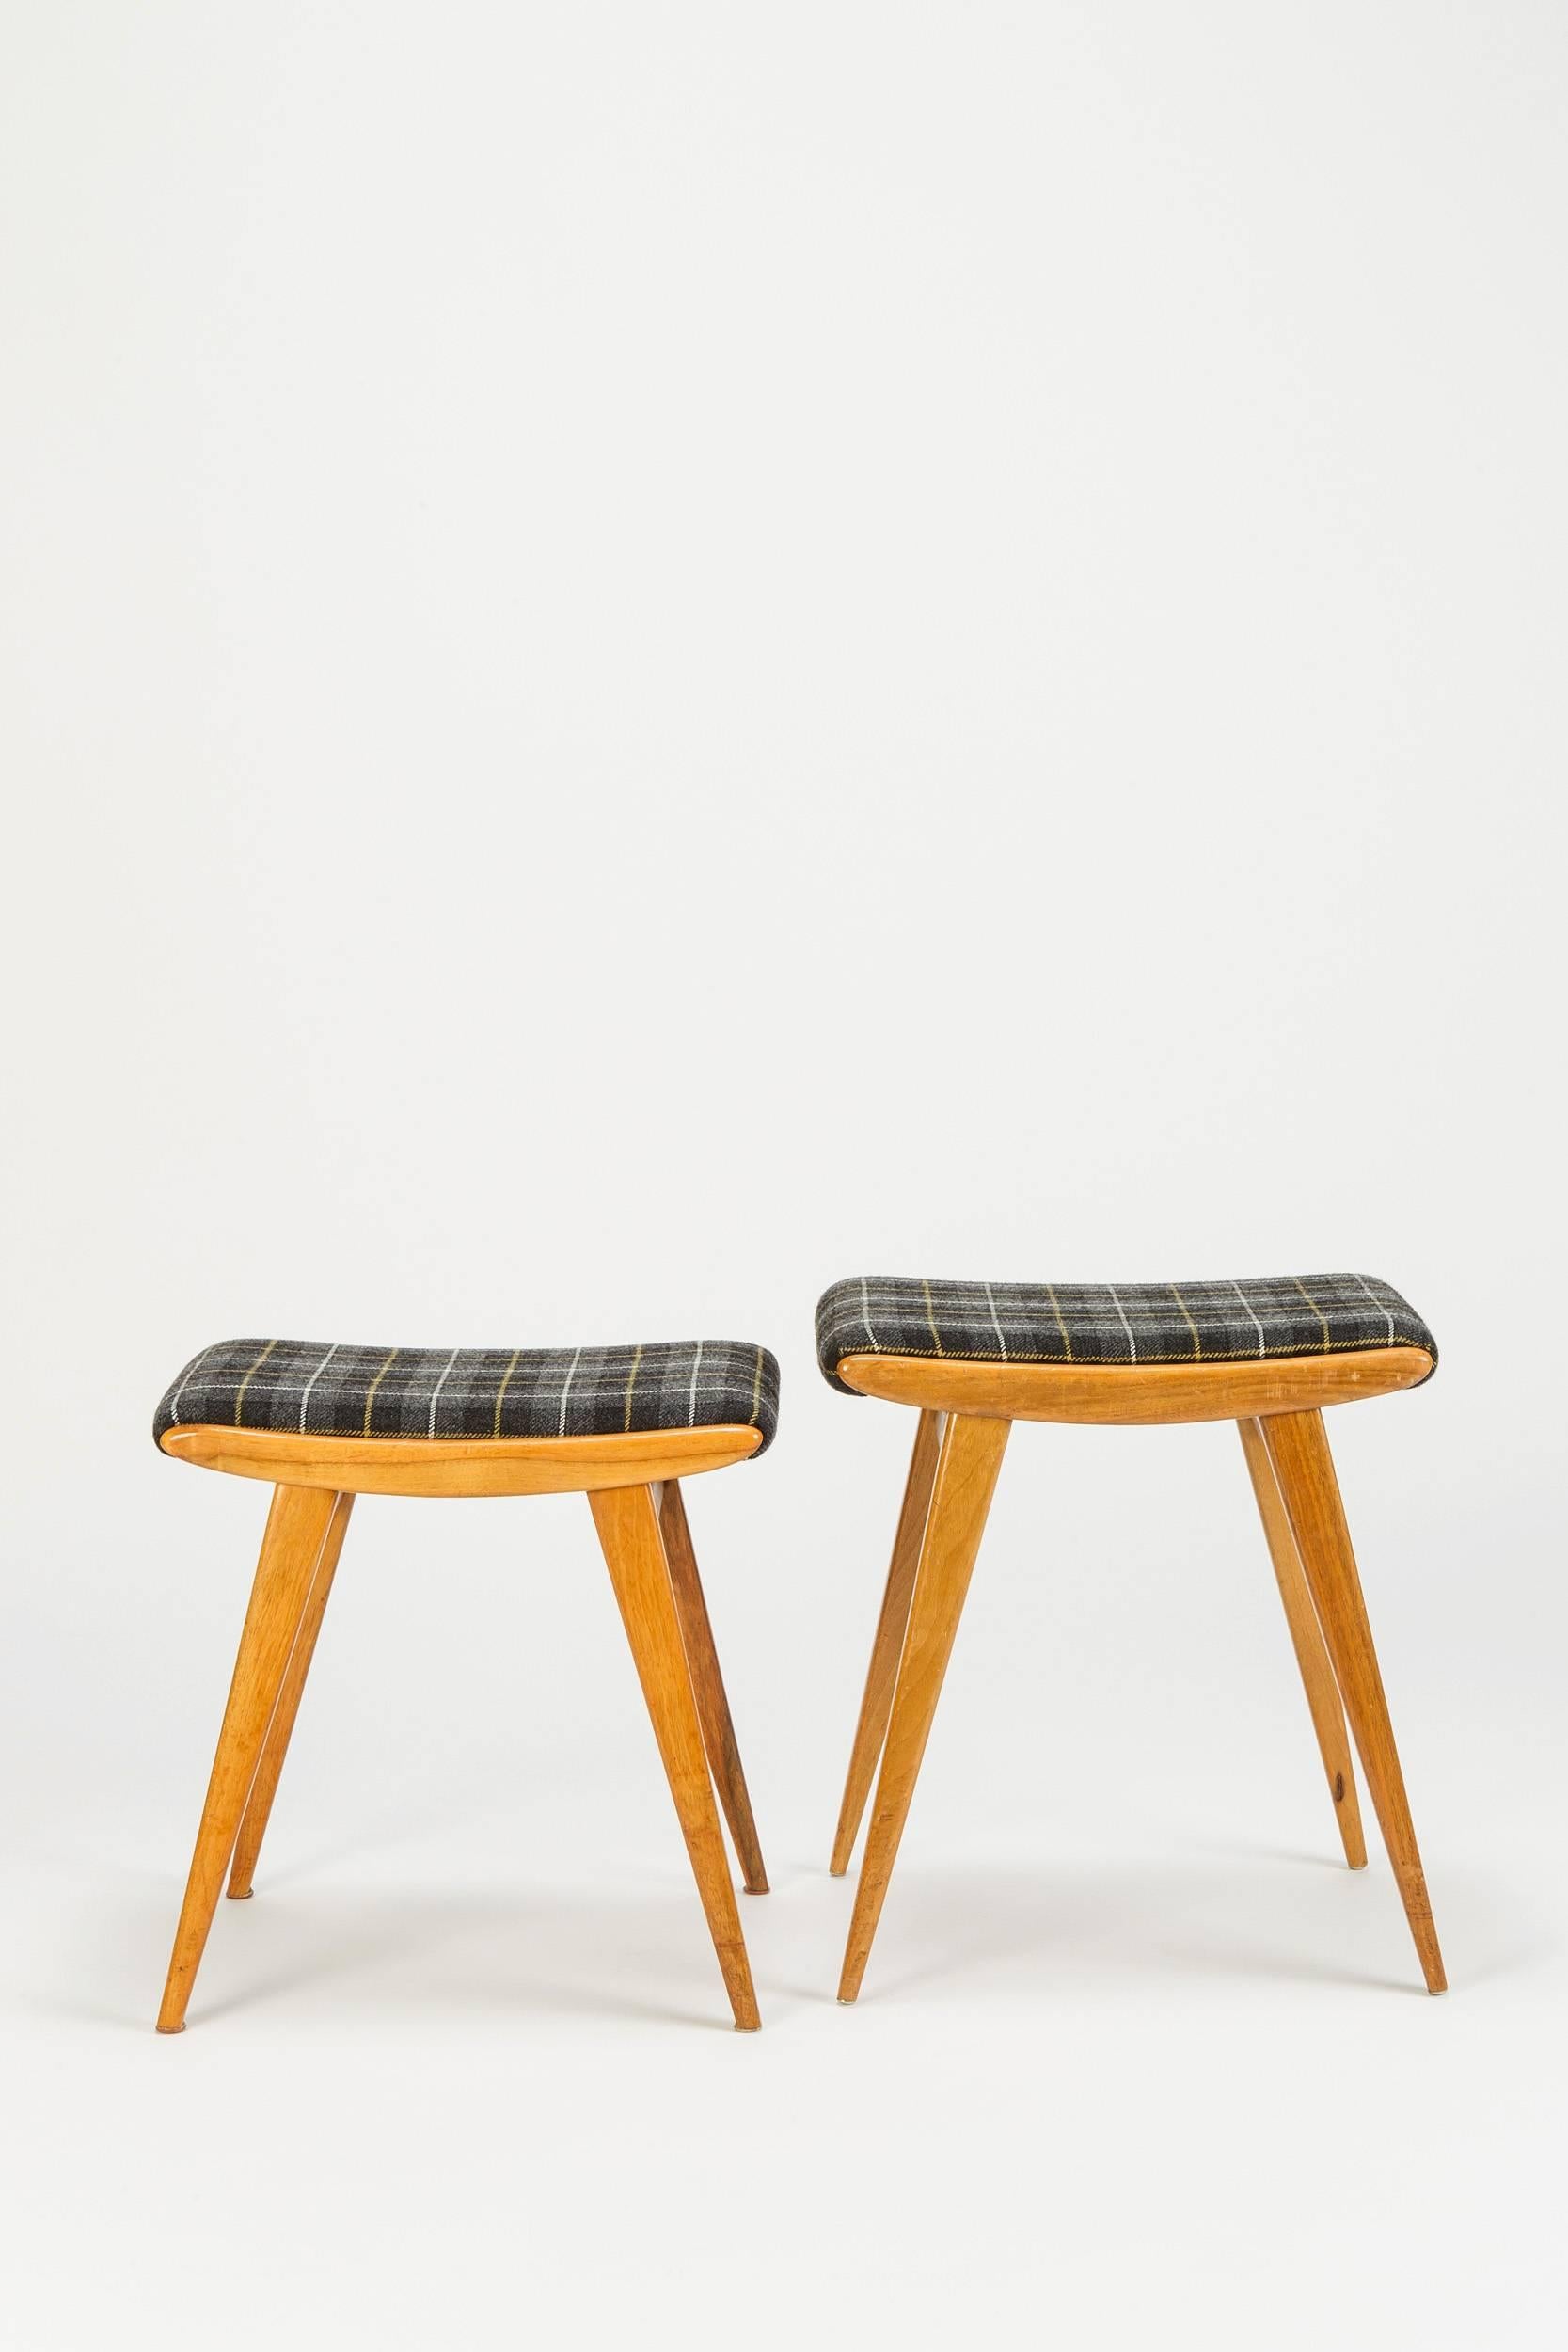 German Pair of Walnut Stools by Jens Risom for H.G. Knoll, 1940s